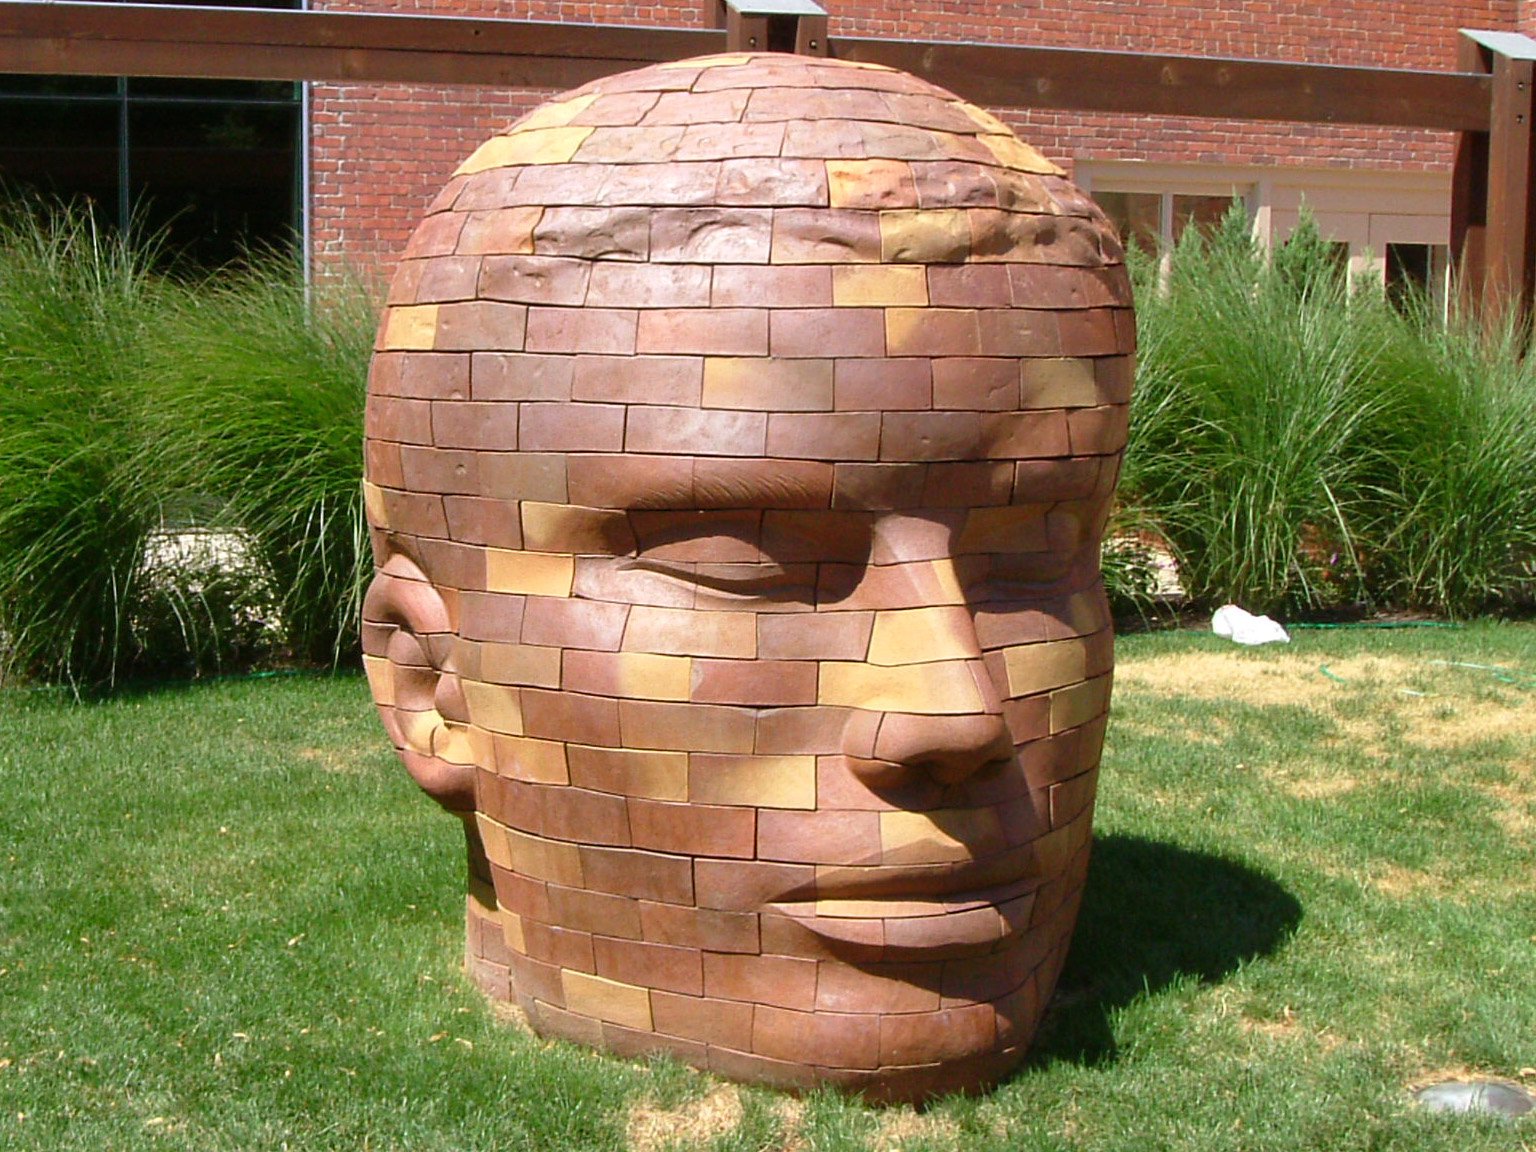 a large brick sculpture is in the grass near a brick building